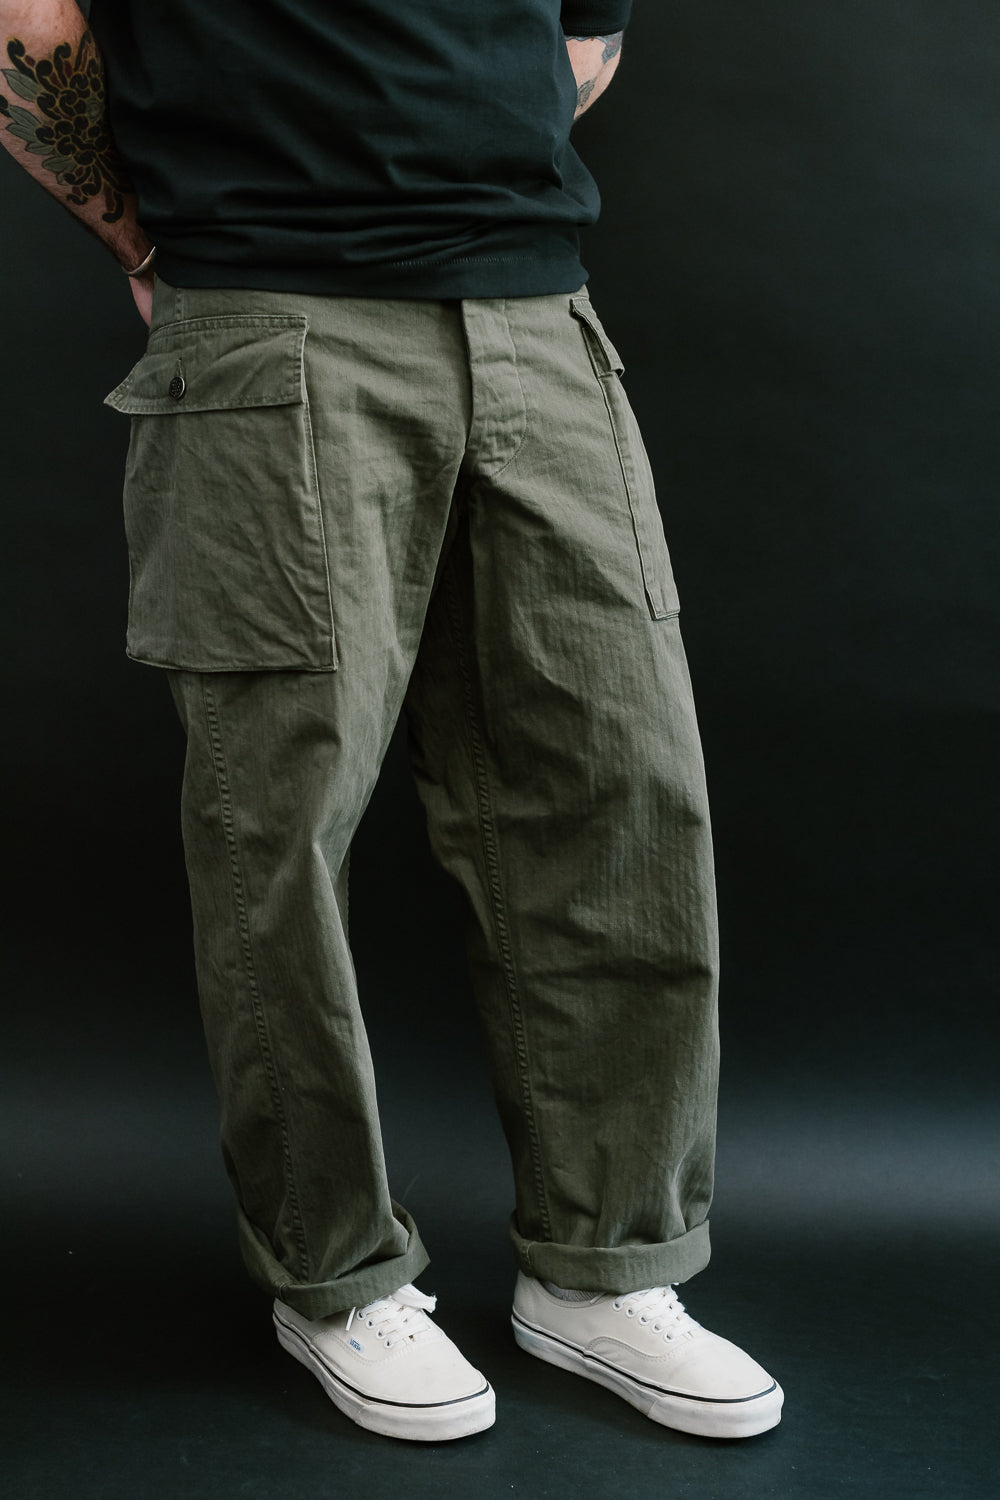 Original army ISSUE Pant(Made in Sri Lanka) – Indian army store